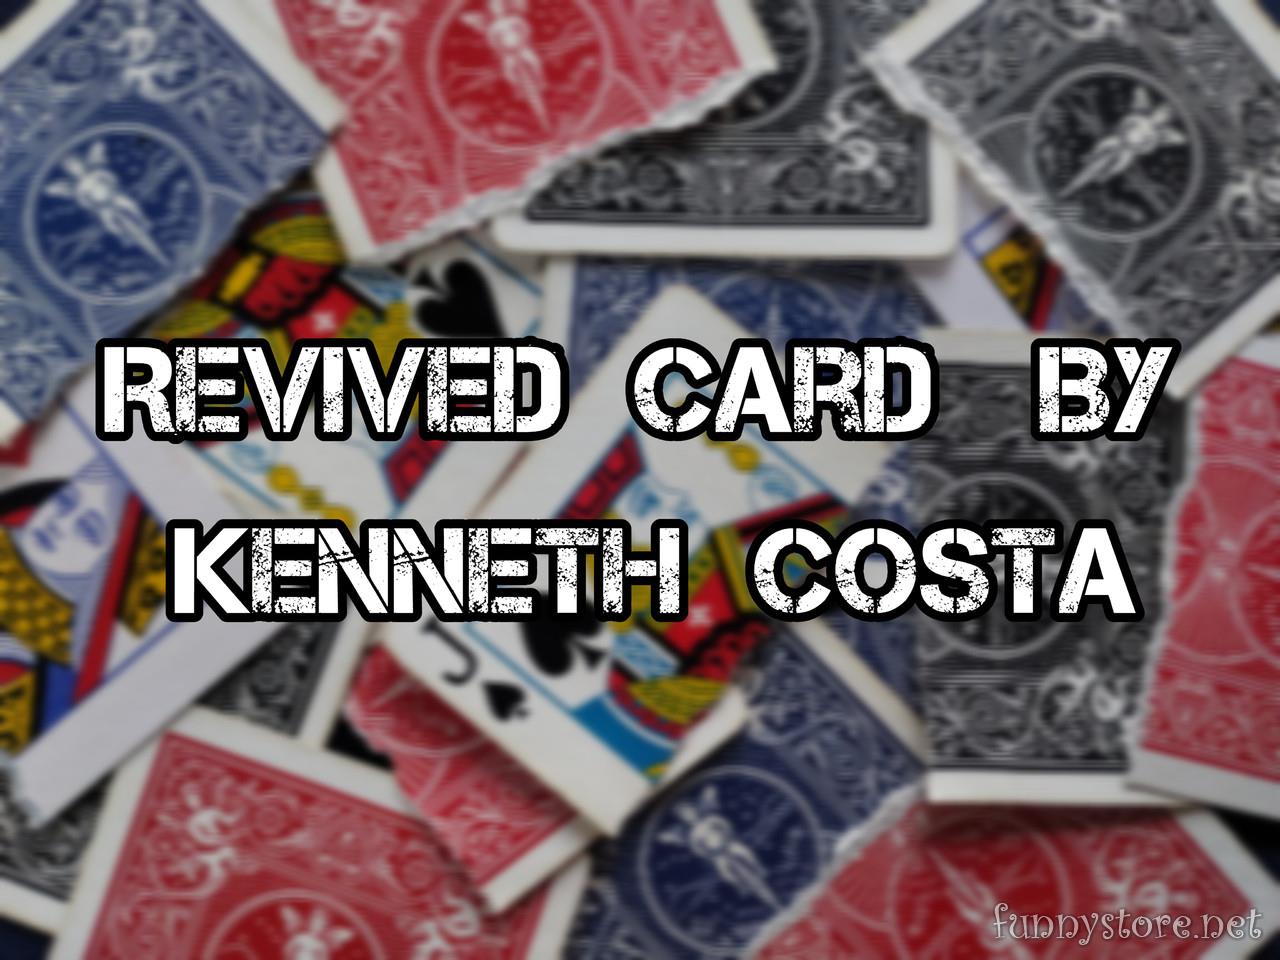 Kenneth Costa - Revived card